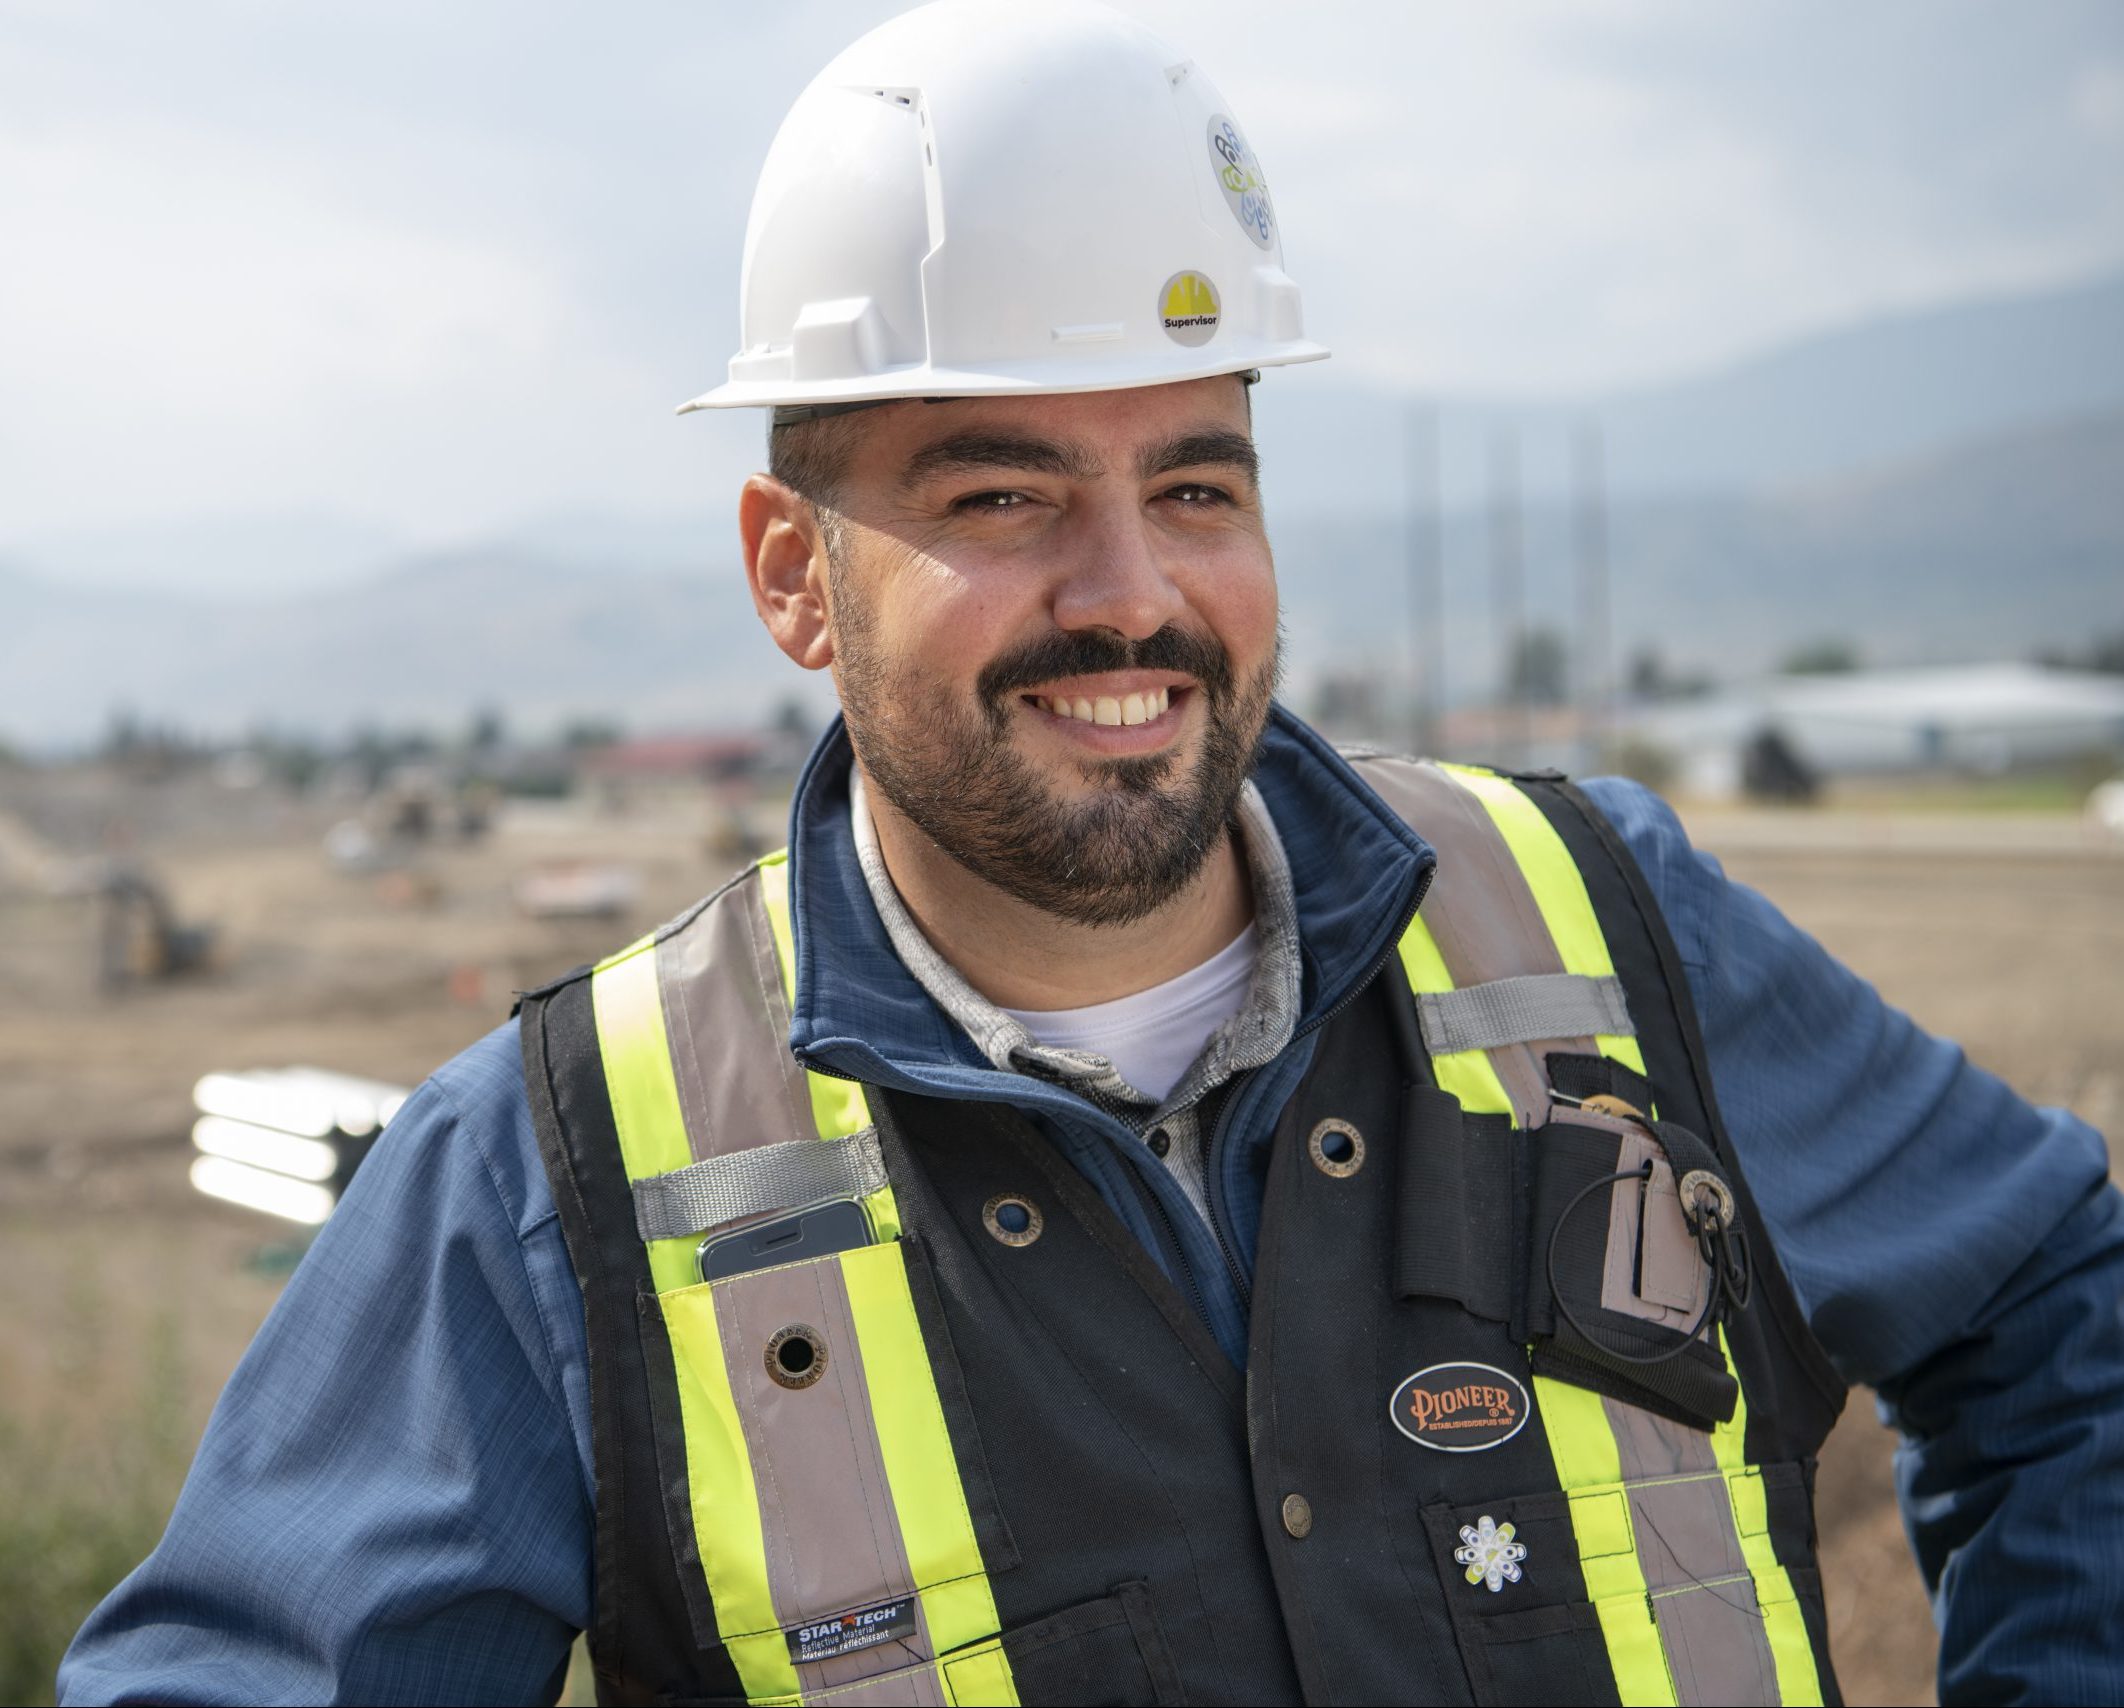 A picture of British Columbia Infrastructure Benefits employee named Duncan Telford smiling